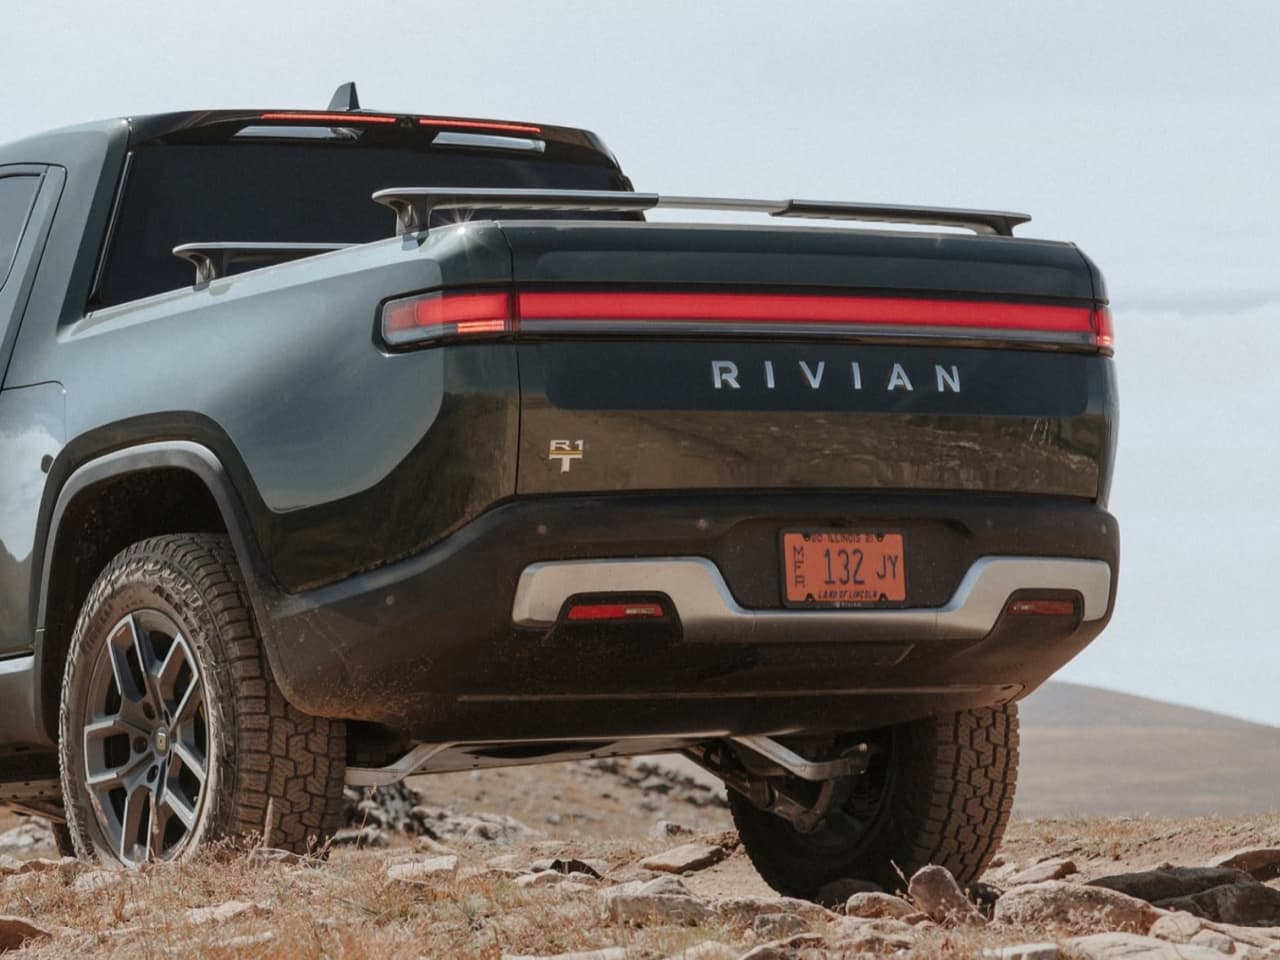 $1.5 Billion Investment in Rivian & Georgia Could Pay off Big Time